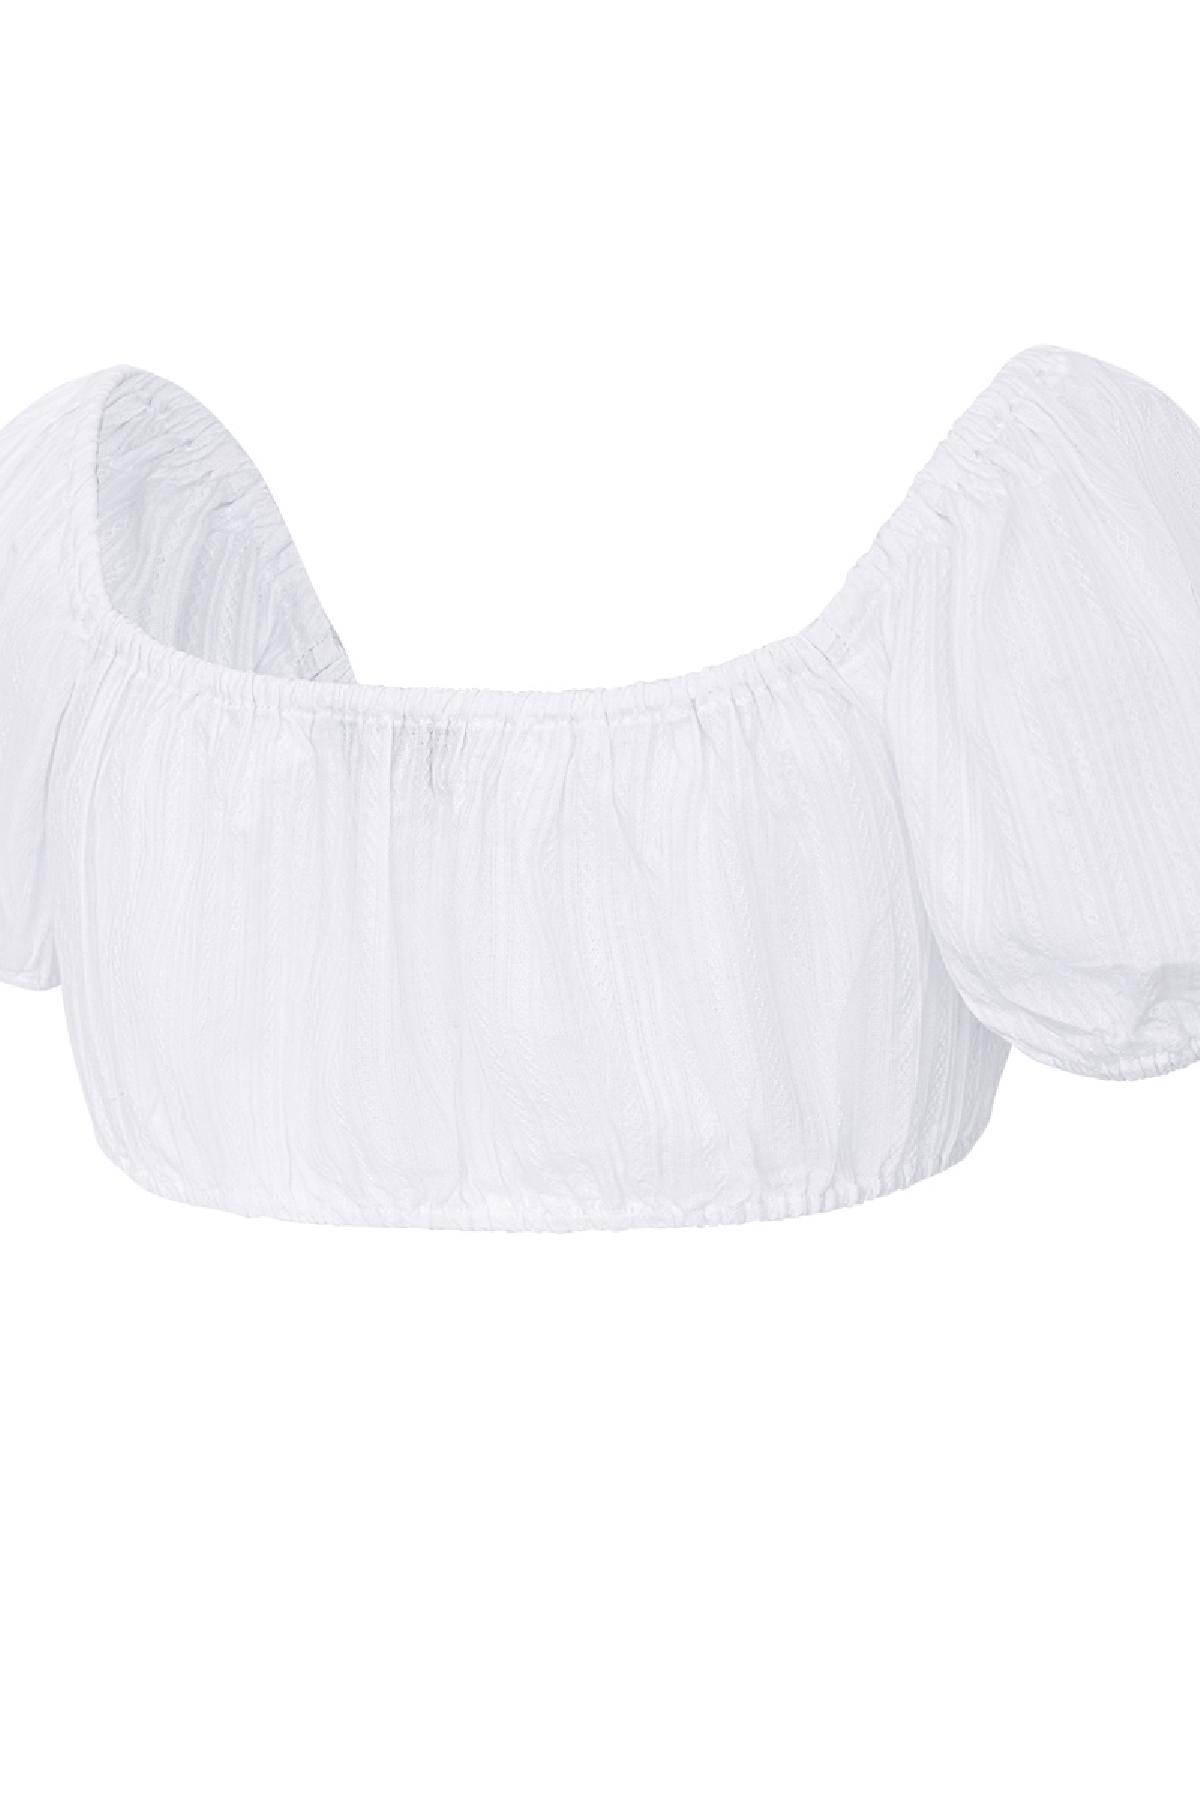 Crop top knotted White S h5 Picture6